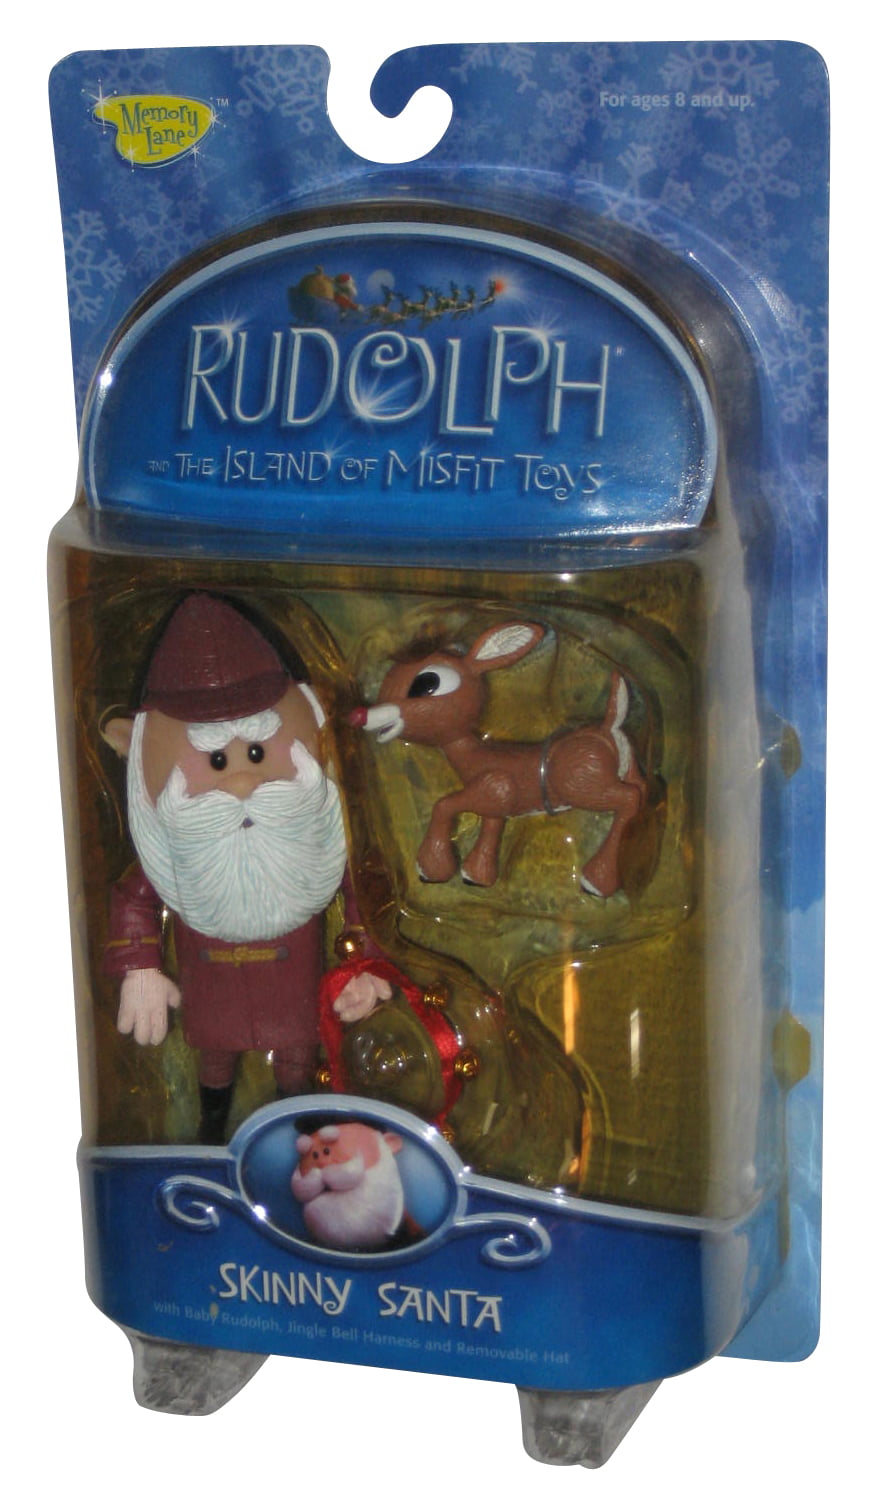 02 Memory Lane SKINNY Santa With Baby Rudolph The Island of Misfit Toys for sale online 